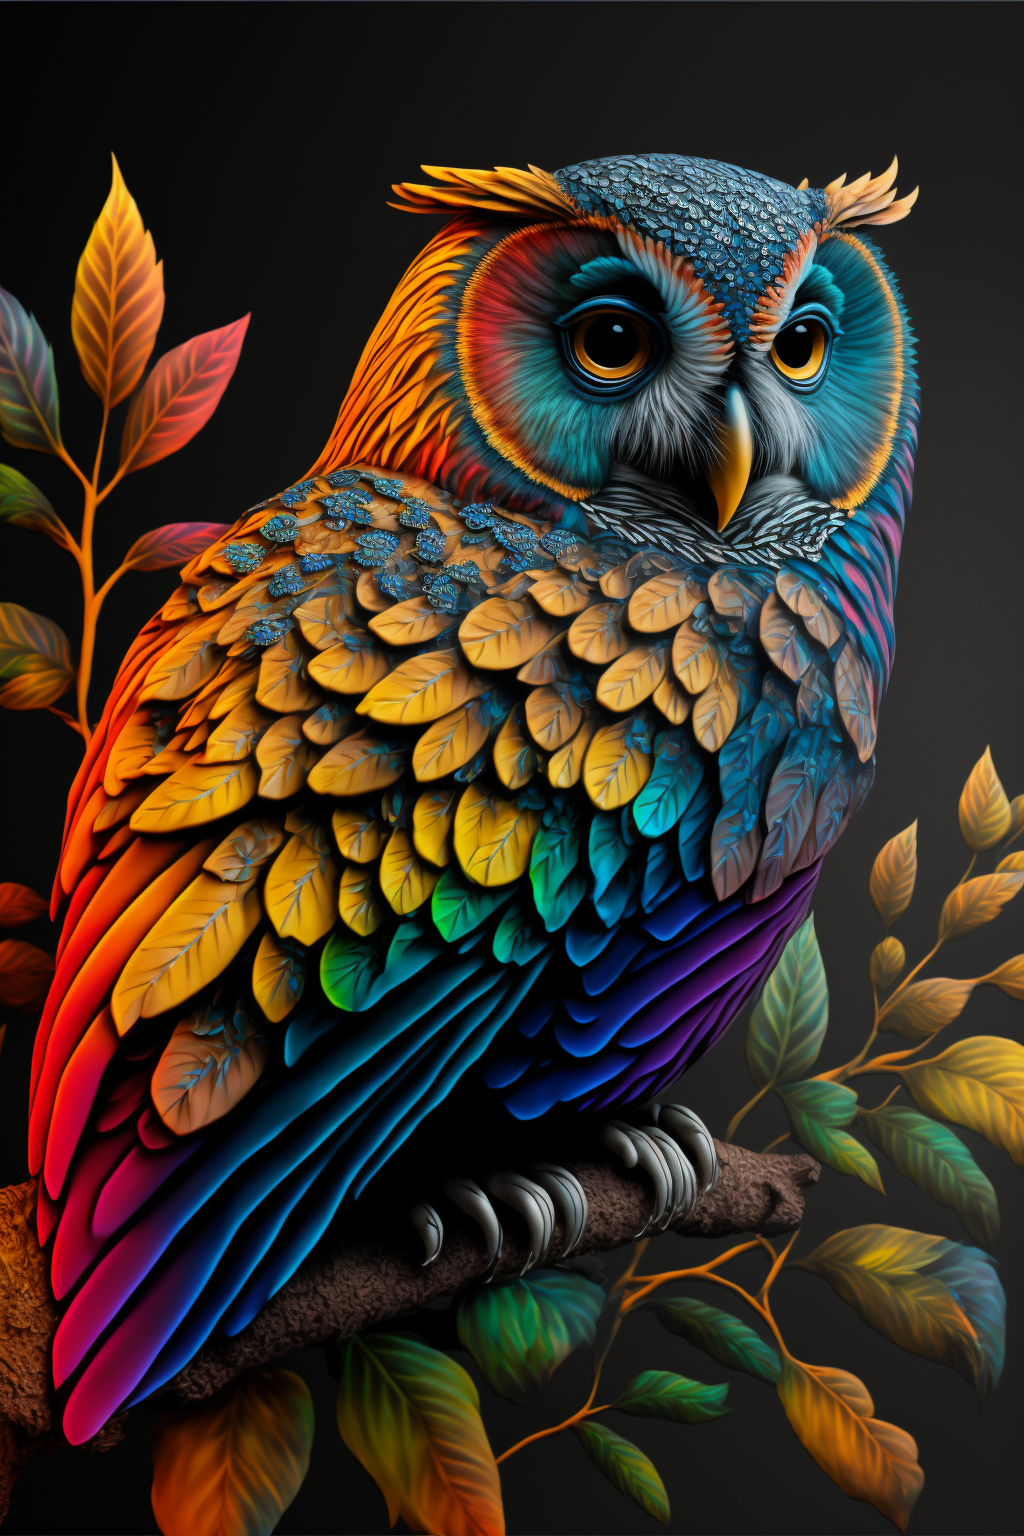 Owl in the style of Hyperrealistic Surrealistic Hypercolor 1